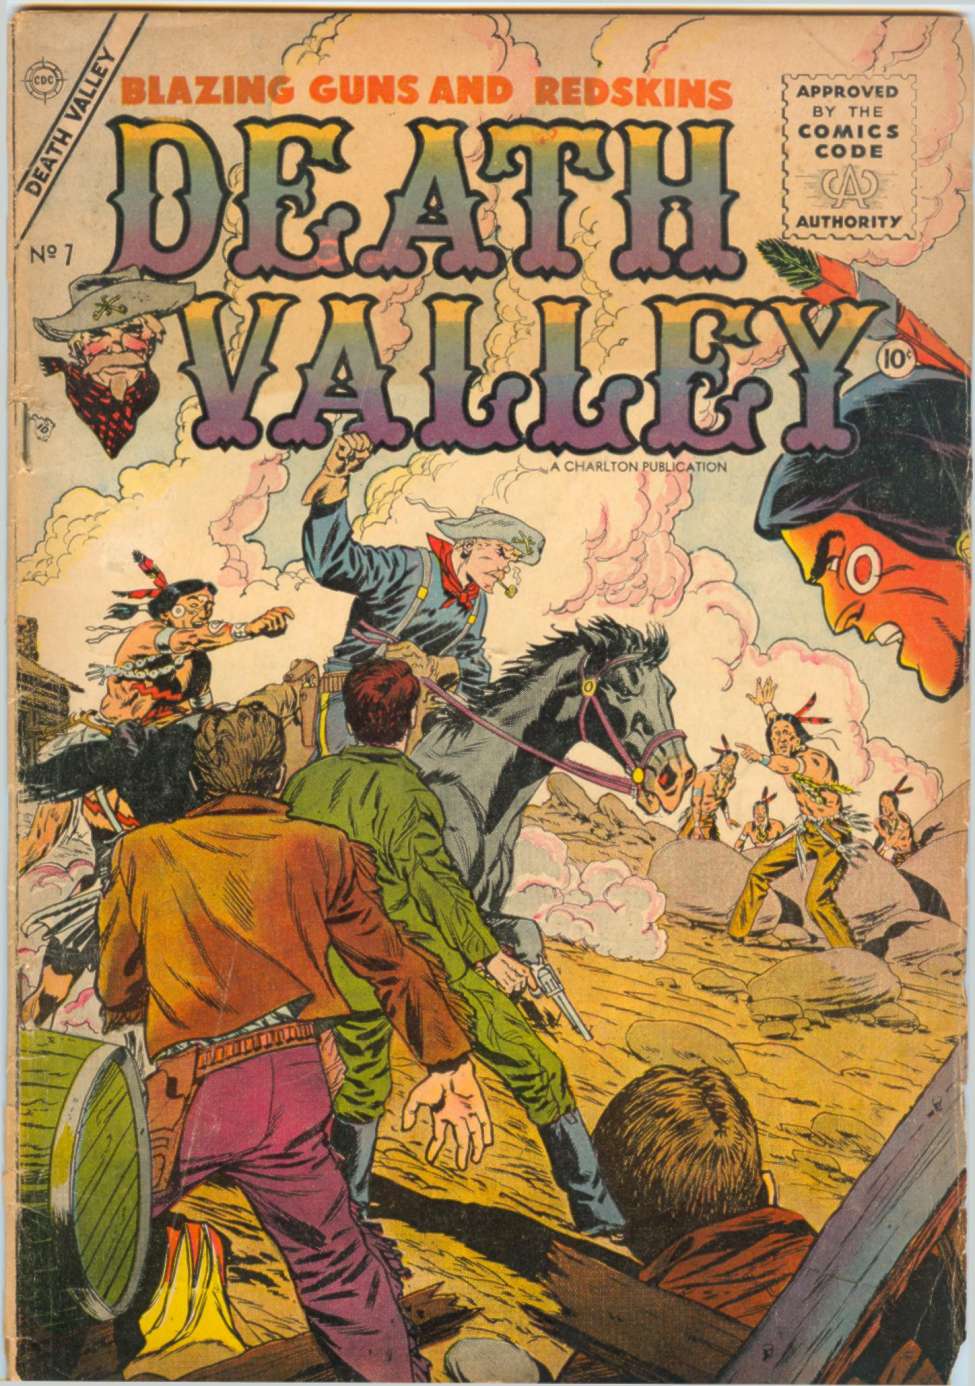 Comic Book Cover For Death Valley 7 - Version 1